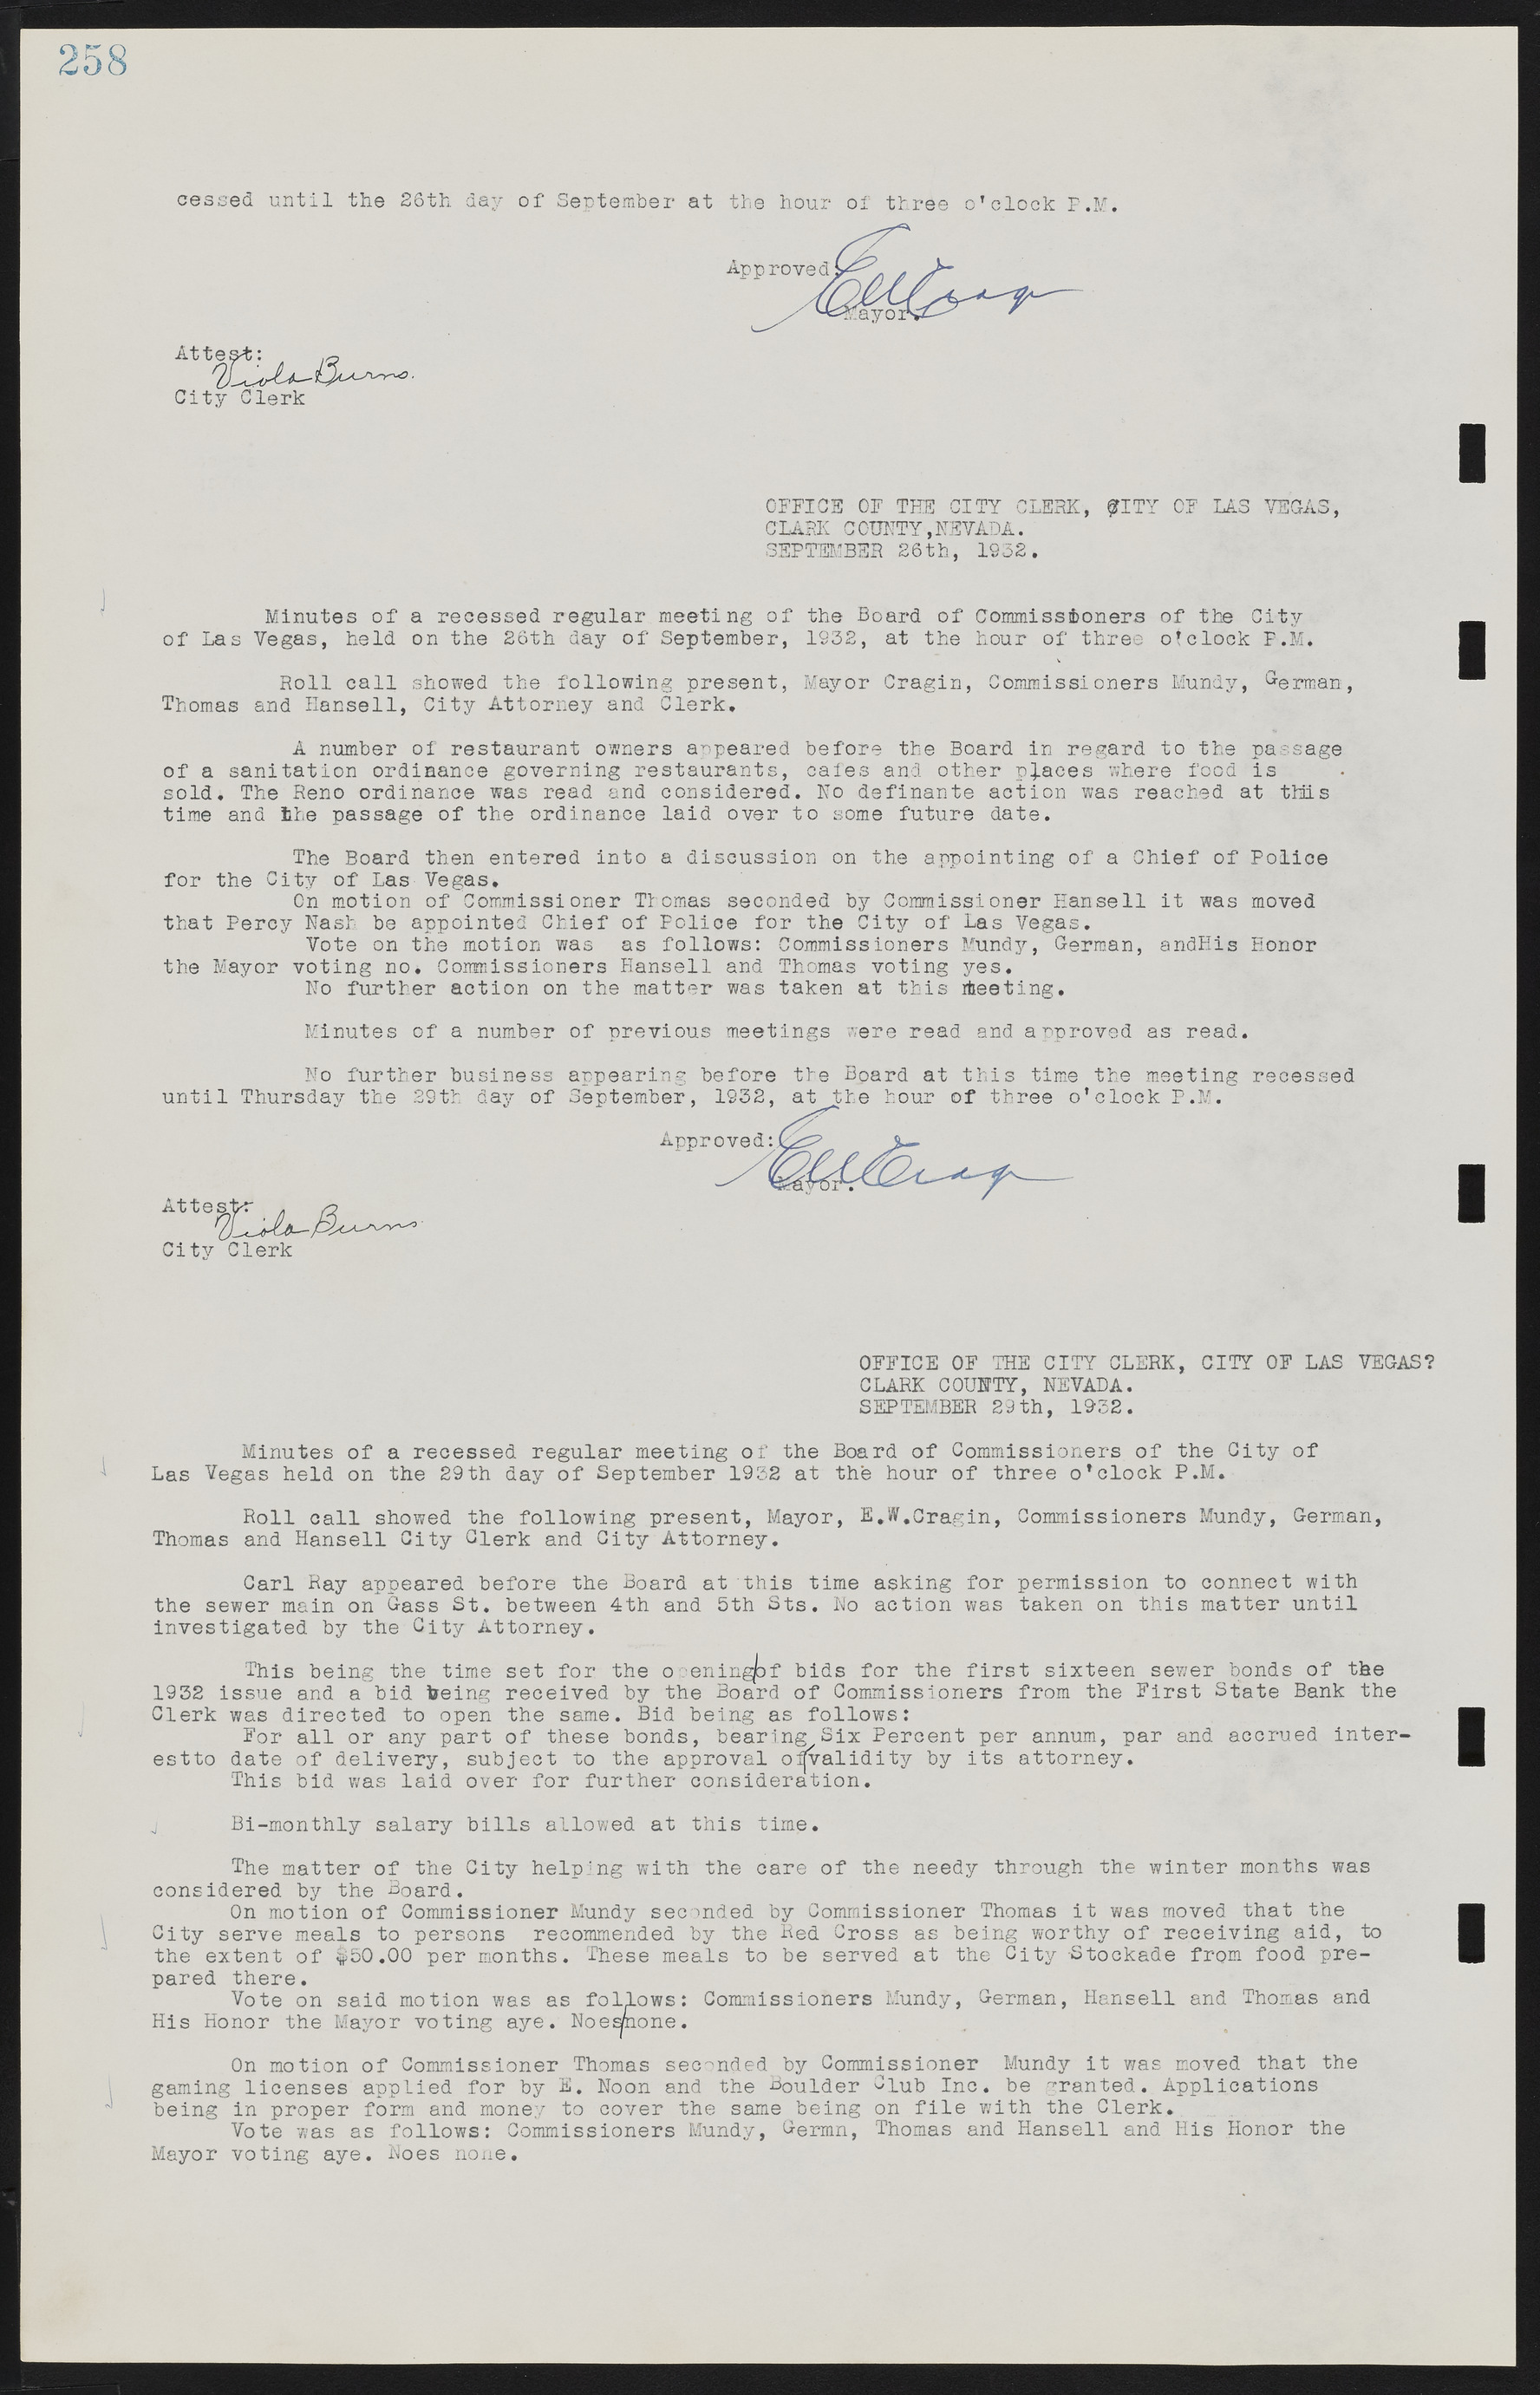 Las Vegas City Commission Minutes, May 14, 1929 to February 11, 1937, lvc000003-264